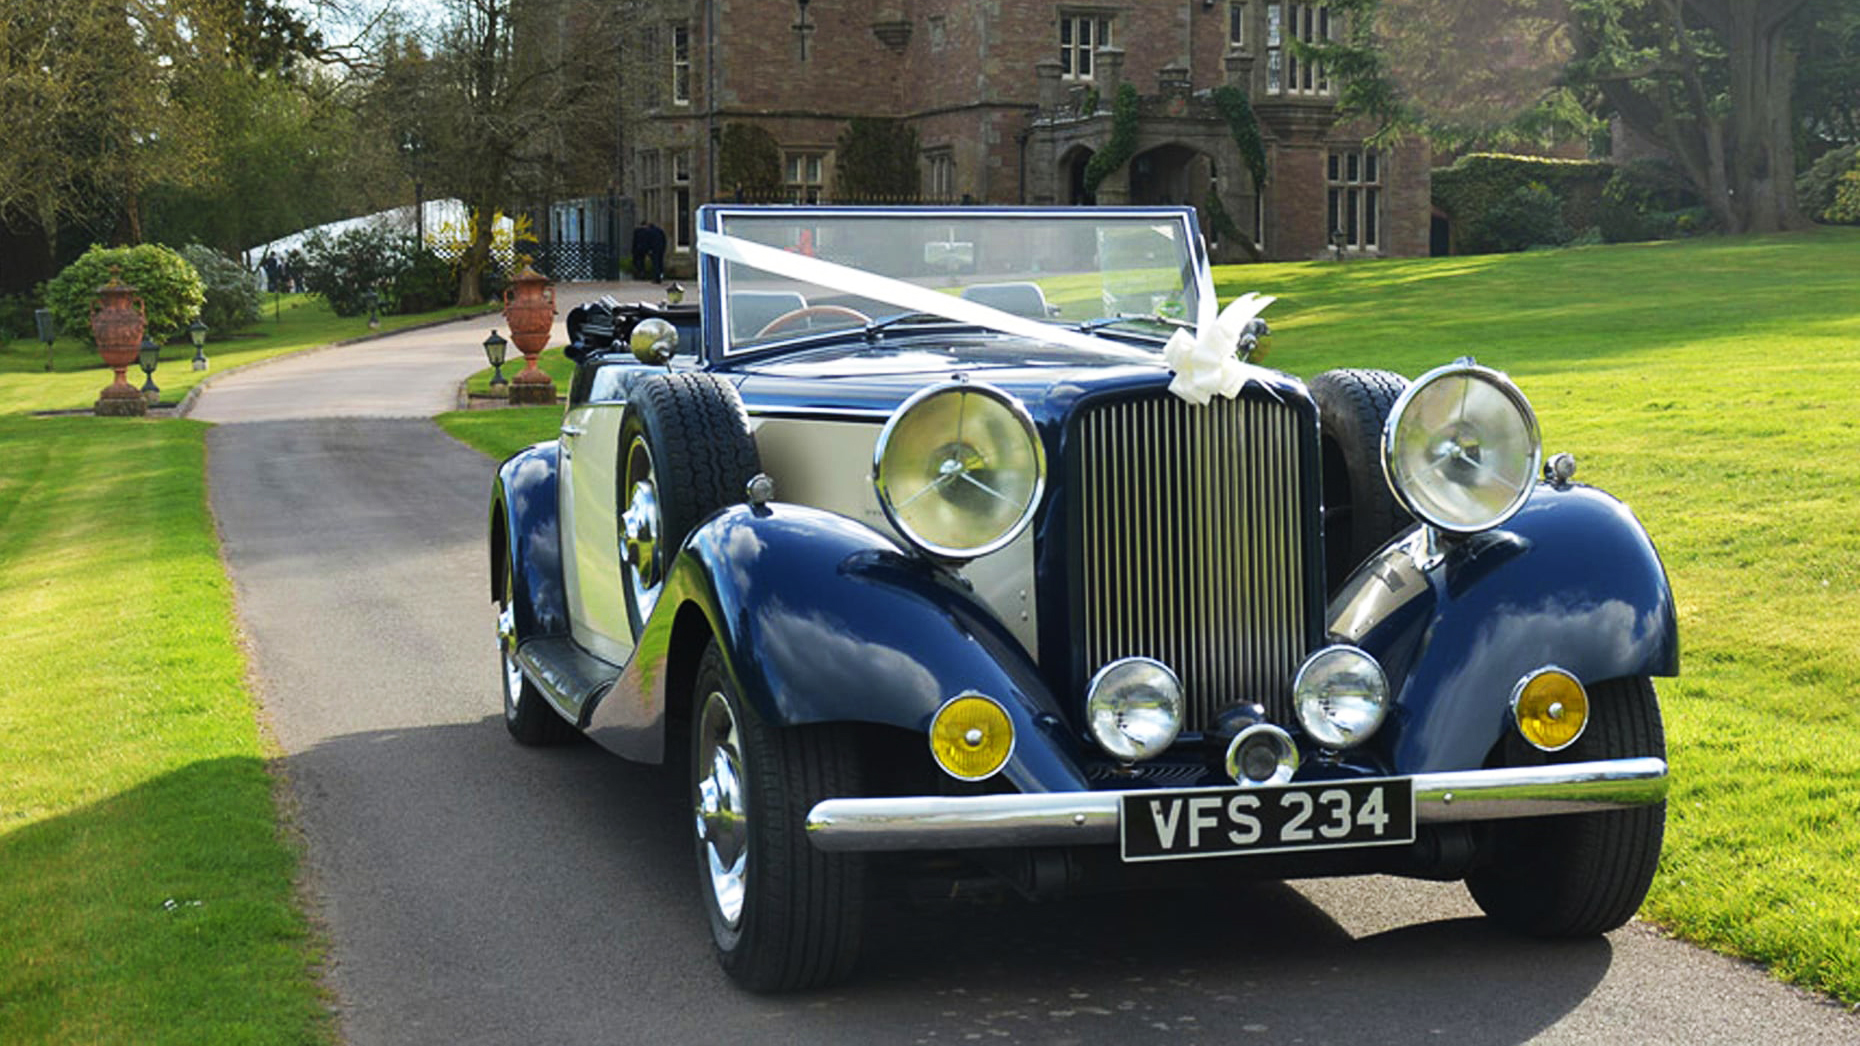 Blue and Ivory vintage Jaguar Drophead on the driveway of a local wedding venue inMarket Harborough.